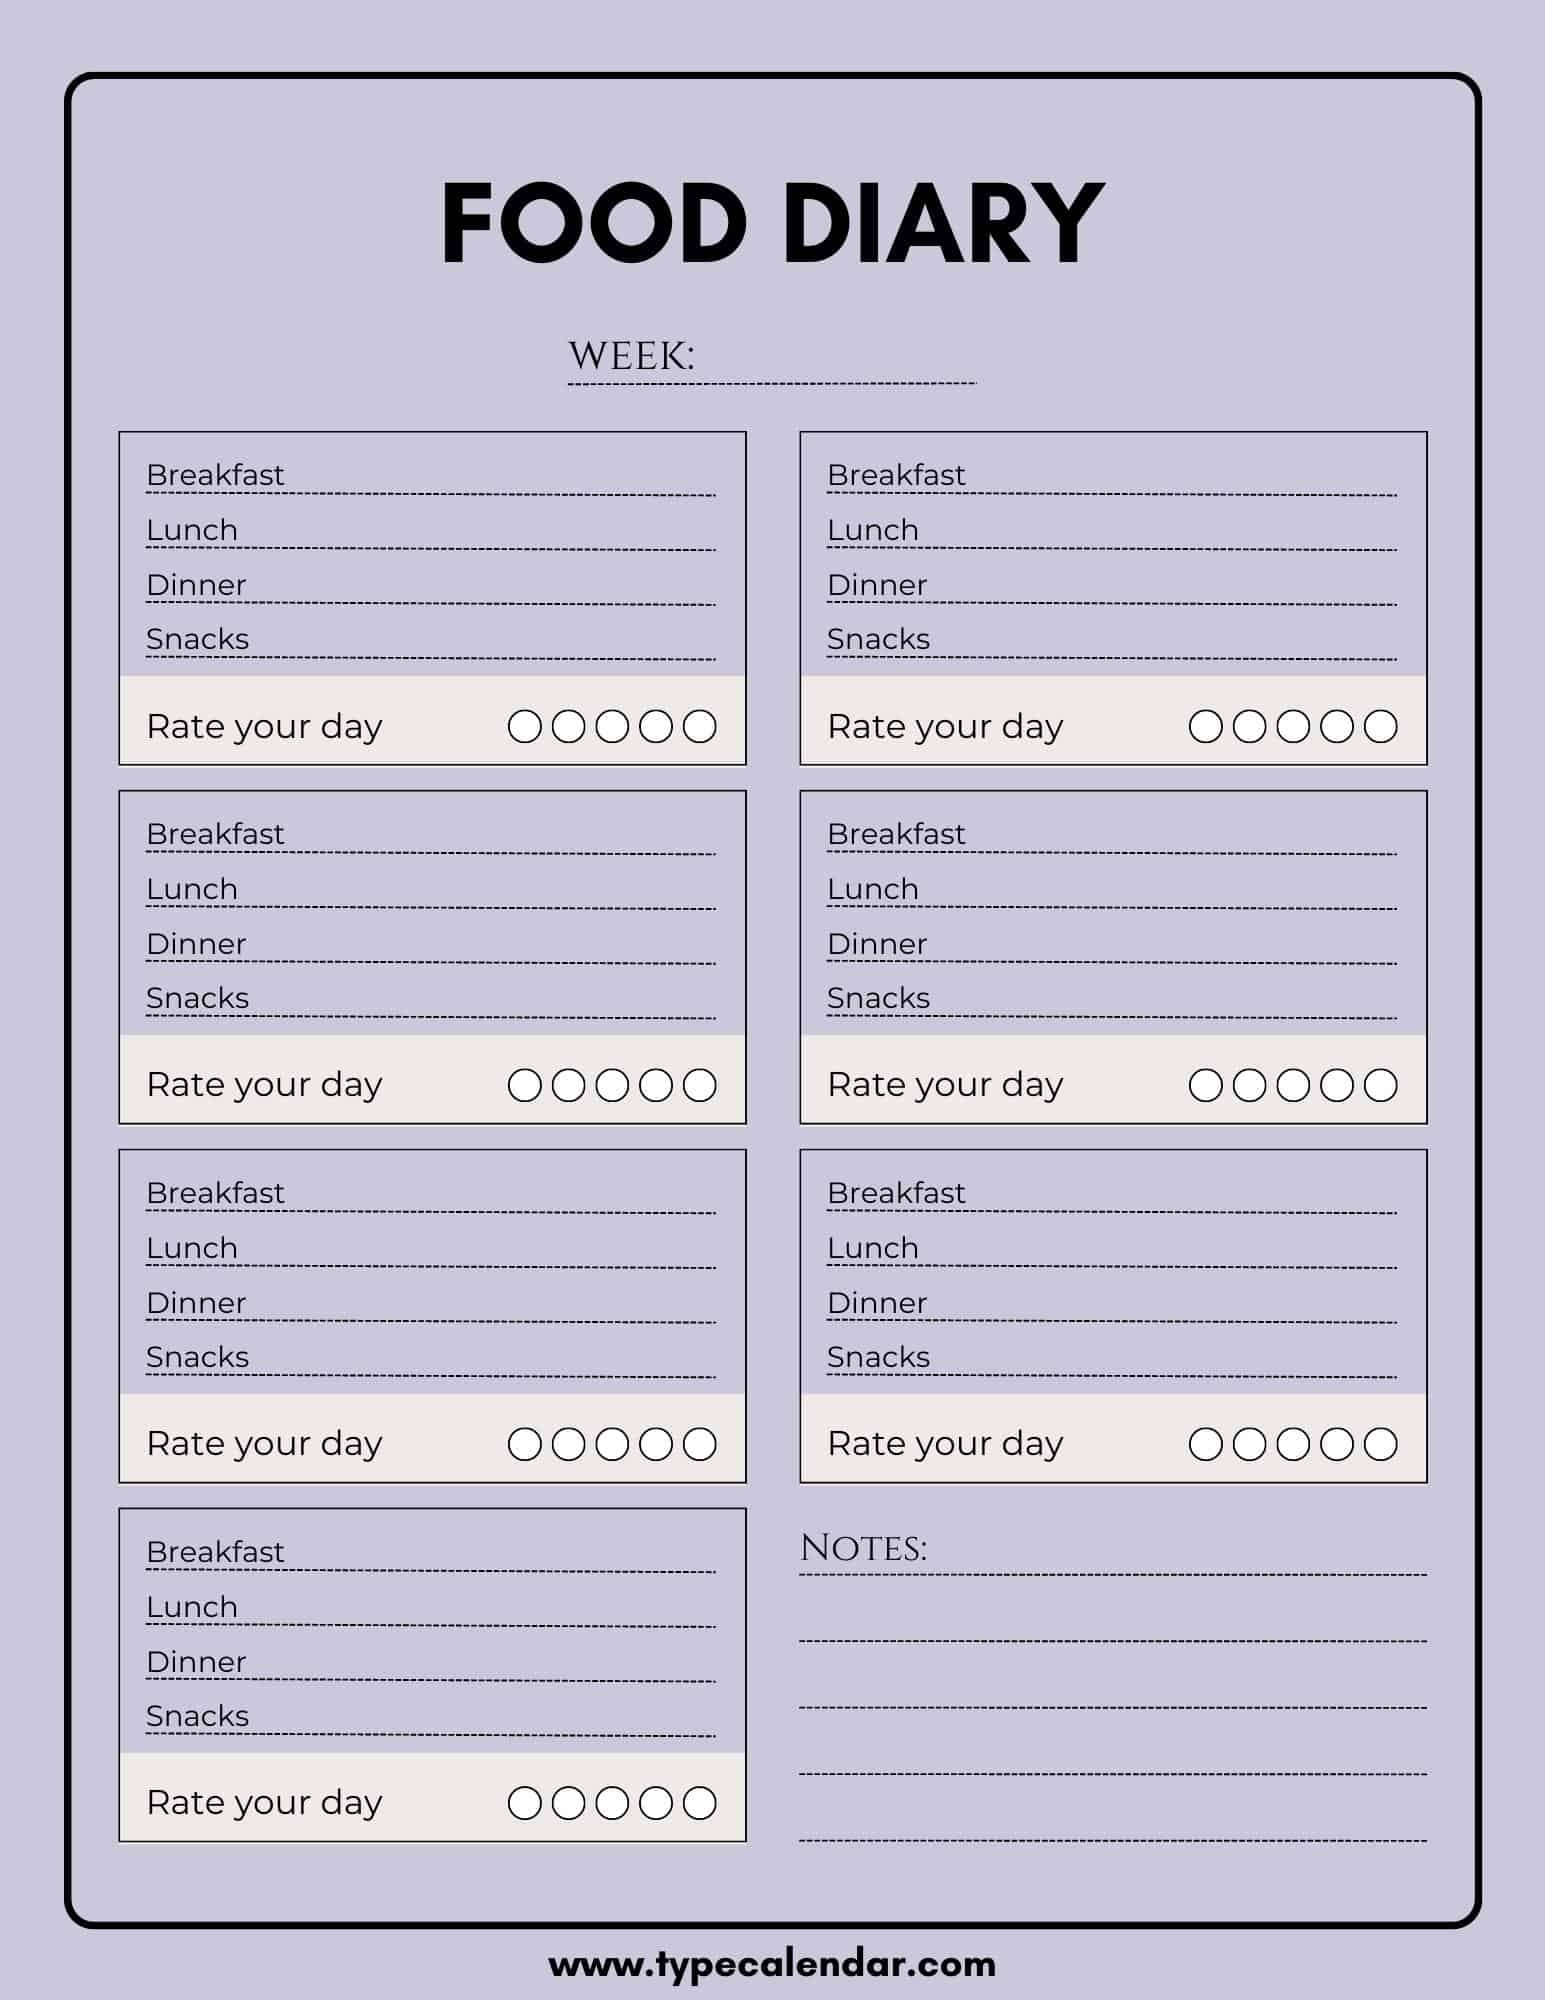 Free Printable Food Diary Templates Word Excel PDF - Free Printable Calorie Counter Journal